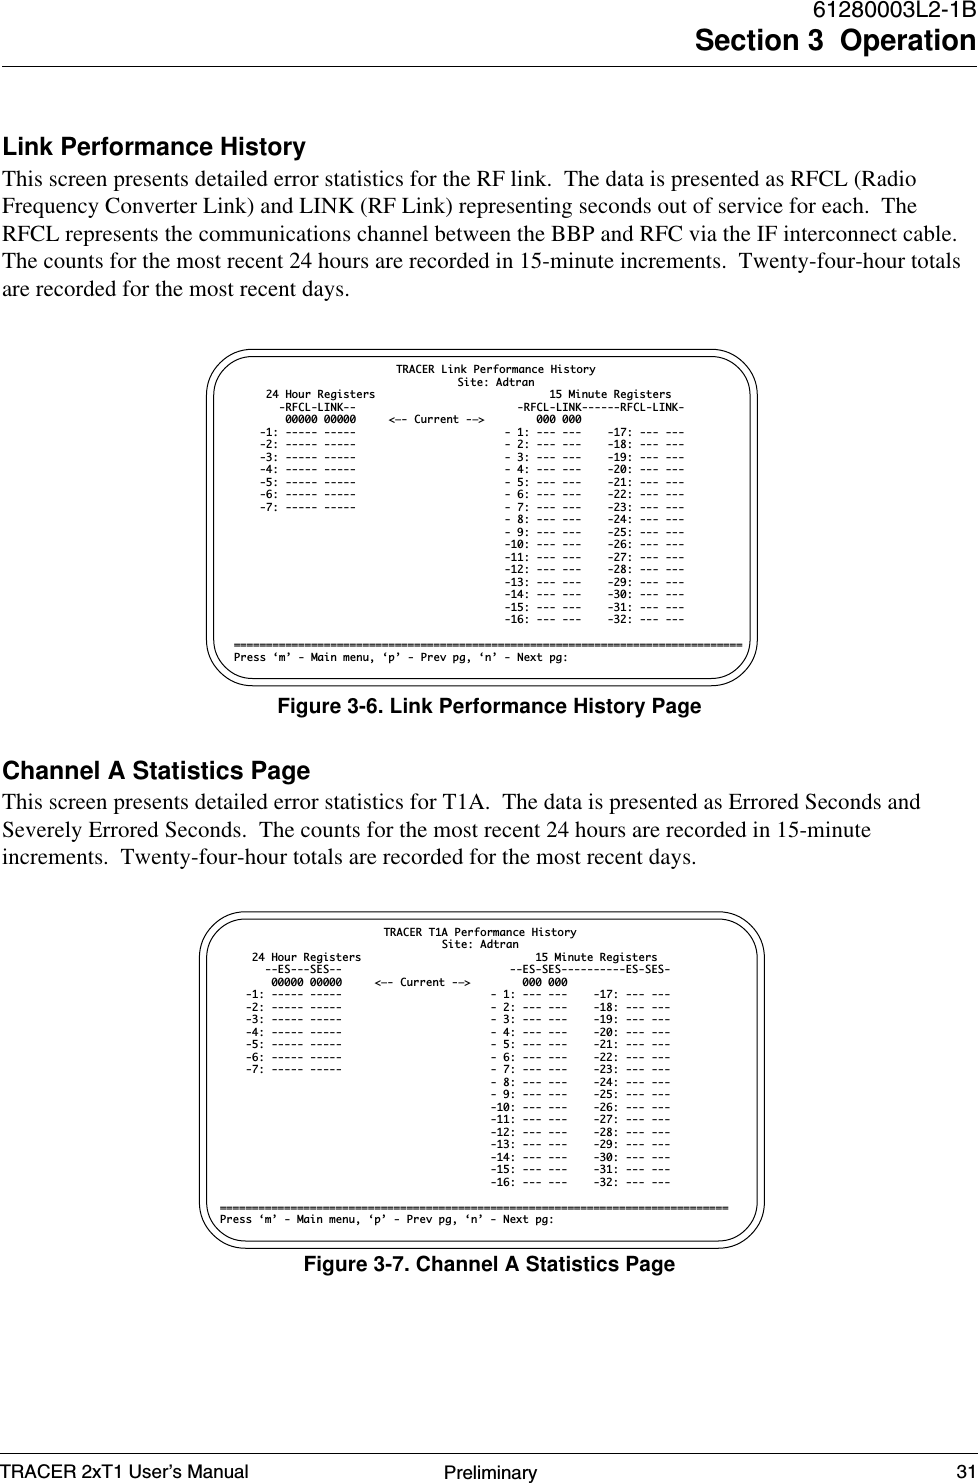 TRACER 2xT1 User’s Manual61280003L2-1BSection 3  Operation31PreliminaryLink Performance HistoryThis screen presents detailed error statistics for the RF link.  The data is presented as RFCL (RadioFrequency Converter Link) and LINK (RF Link) representing seconds out of service for each.  TheRFCL represents the communications channel between the BBP and RFC via the IF interconnect cable.The counts for the most recent 24 hours are recorded in 15-minute increments.  Twenty-four-hour totalsare recorded for the most recent days.Channel A Statistics PageThis screen presents detailed error statistics for T1A.  The data is presented as Errored Seconds andSeverely Errored Seconds.  The counts for the most recent 24 hours are recorded in 15-minuteincrements.  Twenty-four-hour totals are recorded for the most recent days.Figure 3-6. Link Performance History PageTRACER Link Performance HistorySite: Adtran     24 Hour Registers                           15 Minute Registers       -RFCL-LINK--                         -RFCL-LINK------RFCL-LINK-        00000 00000     &lt;—- Current -—&gt;        000 000    -1: ----- -----                       - 1: --- ---    -17: --- ---    -2: ----- -----                       - 2: --- ---    -18: --- ---    -3: ----- -----                       - 3: --- ---    -19: --- ---    -4: ----- -----                       - 4: --- ---    -20: --- ---    -5: ----- -----                       - 5: --- ---    -21: --- ---    -6: ----- -----                       - 6: --- ---    -22: --- ---    -7: ----- -----                       - 7: --- ---    -23: --- ---                                          - 8: --- ---    -24: --- ---                                          - 9: --- ---    -25: --- ---                                          -10: --- ---    -26: --- ---                                          -11: --- ---    -27: --- ---                                          -12: --- ---    -28: --- ---                                          -13: --- ---    -29: --- ---                                          -14: --- ---    -30: --- ---                                          -15: --- ---    -31: --- ---                                          -16: --- ---    -32: --- ---===============================================================================Press ‘m’ - Main menu, ‘p’ - Prev pg, ‘n’ - Next pg:Figure 3-7. Channel A Statistics PageTRACER T1A Performance HistorySite: Adtran     24 Hour Registers                           15 Minute Registers       --ES---SES--                          --ES-SES----------ES-SES-        00000 00000     &lt;—- Current -—&gt;        000 000    -1: ----- -----                       - 1: --- ---    -17: --- ---    -2: ----- -----                       - 2: --- ---    -18: --- ---    -3: ----- -----                       - 3: --- ---    -19: --- ---    -4: ----- -----                       - 4: --- ---    -20: --- ---    -5: ----- -----                       - 5: --- ---    -21: --- ---    -6: ----- -----                       - 6: --- ---    -22: --- ---    -7: ----- -----                       - 7: --- ---    -23: --- ---                                          - 8: --- ---    -24: --- ---                                          - 9: --- ---    -25: --- ---                                          -10: --- ---    -26: --- ---                                          -11: --- ---    -27: --- ---                                          -12: --- ---    -28: --- ---                                          -13: --- ---    -29: --- ---                                          -14: --- ---    -30: --- ---                                          -15: --- ---    -31: --- ---                                          -16: --- ---    -32: --- ---===============================================================================Press ‘m’ - Main menu, ‘p’ - Prev pg, ‘n’ - Next pg: